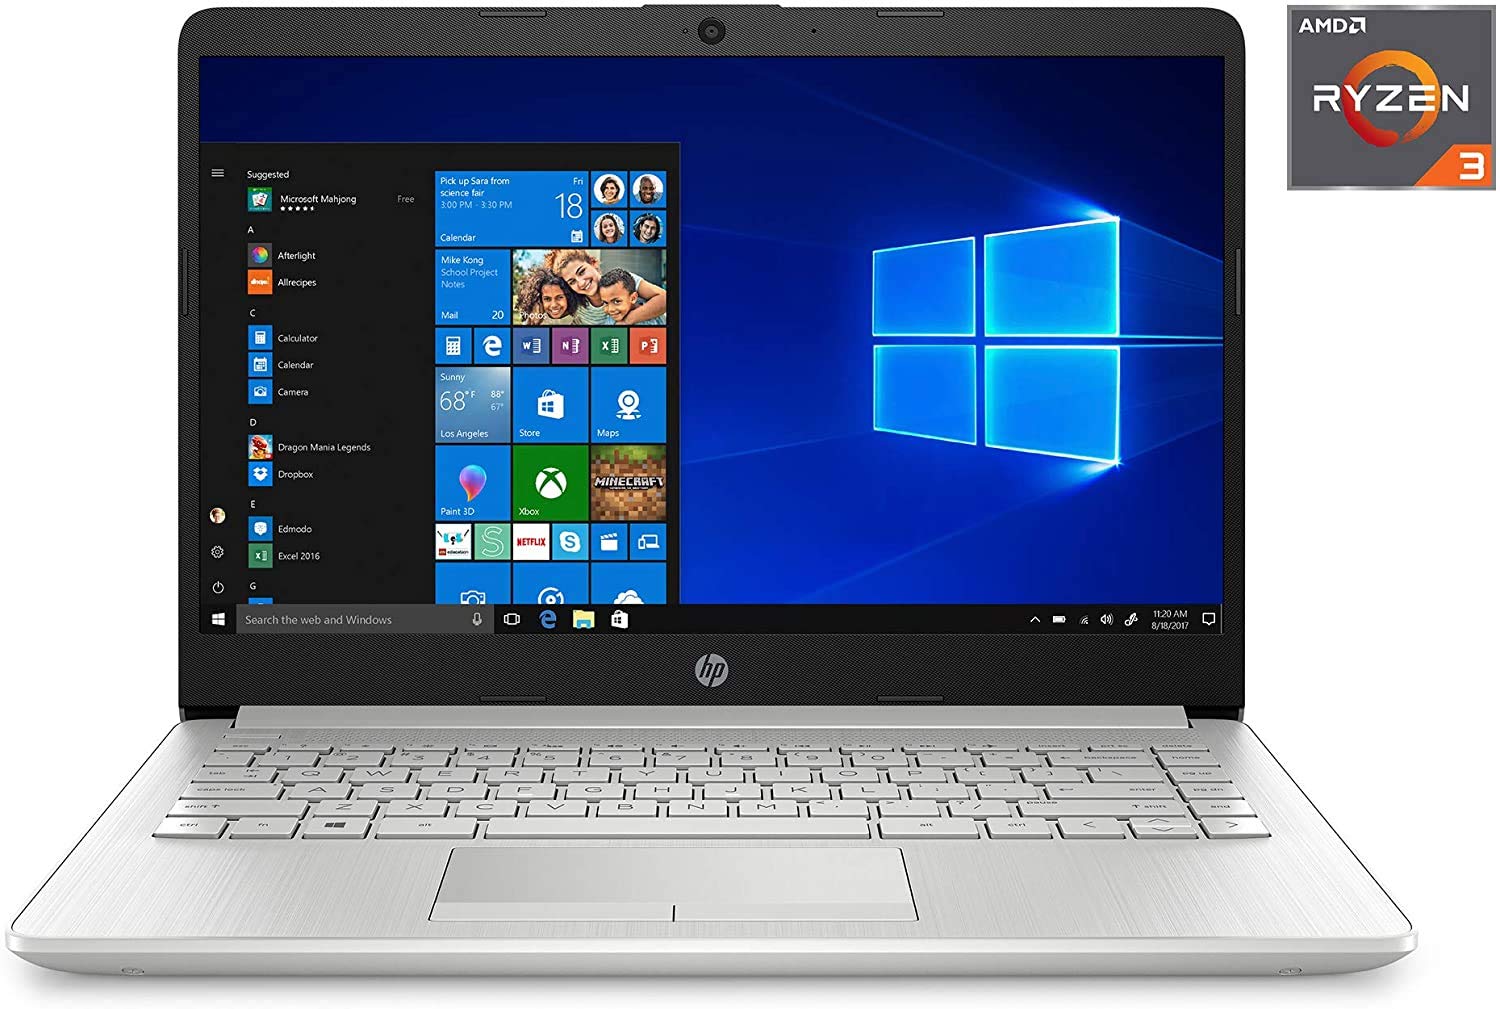 HP 14-fq0032ms Laptop for Business and Student, 14" LED Touchscreen, AMD Ryzen 3 3250U Processor(up to 3.5 GHz), 8GB RAM, 128GB SSD, Webcam, WiFi, Ethernet, HDMI, USB-A&C, Win10